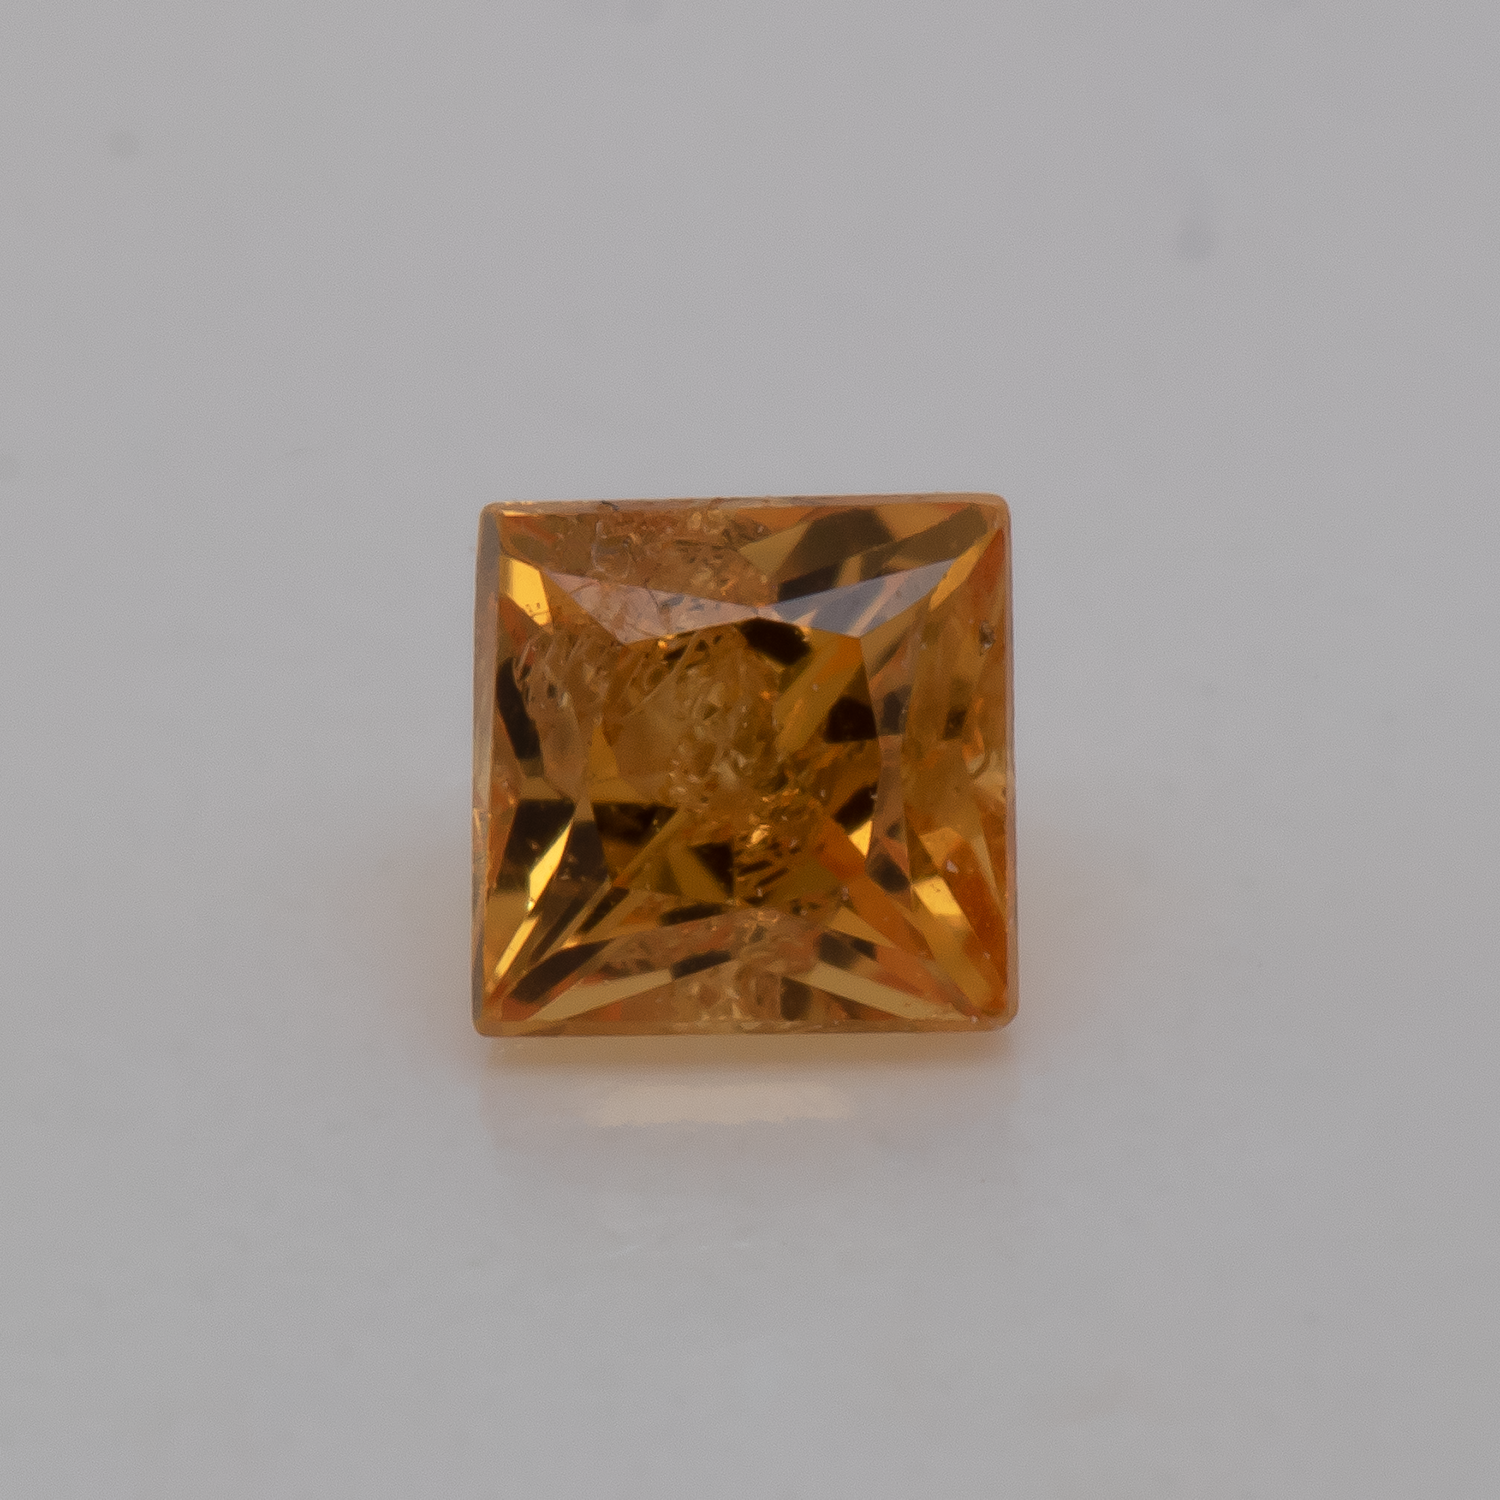 Sapphire - yellow, square, 2.3x2.3 mm, 0.09 - 0.11 cts, No. XSR11251